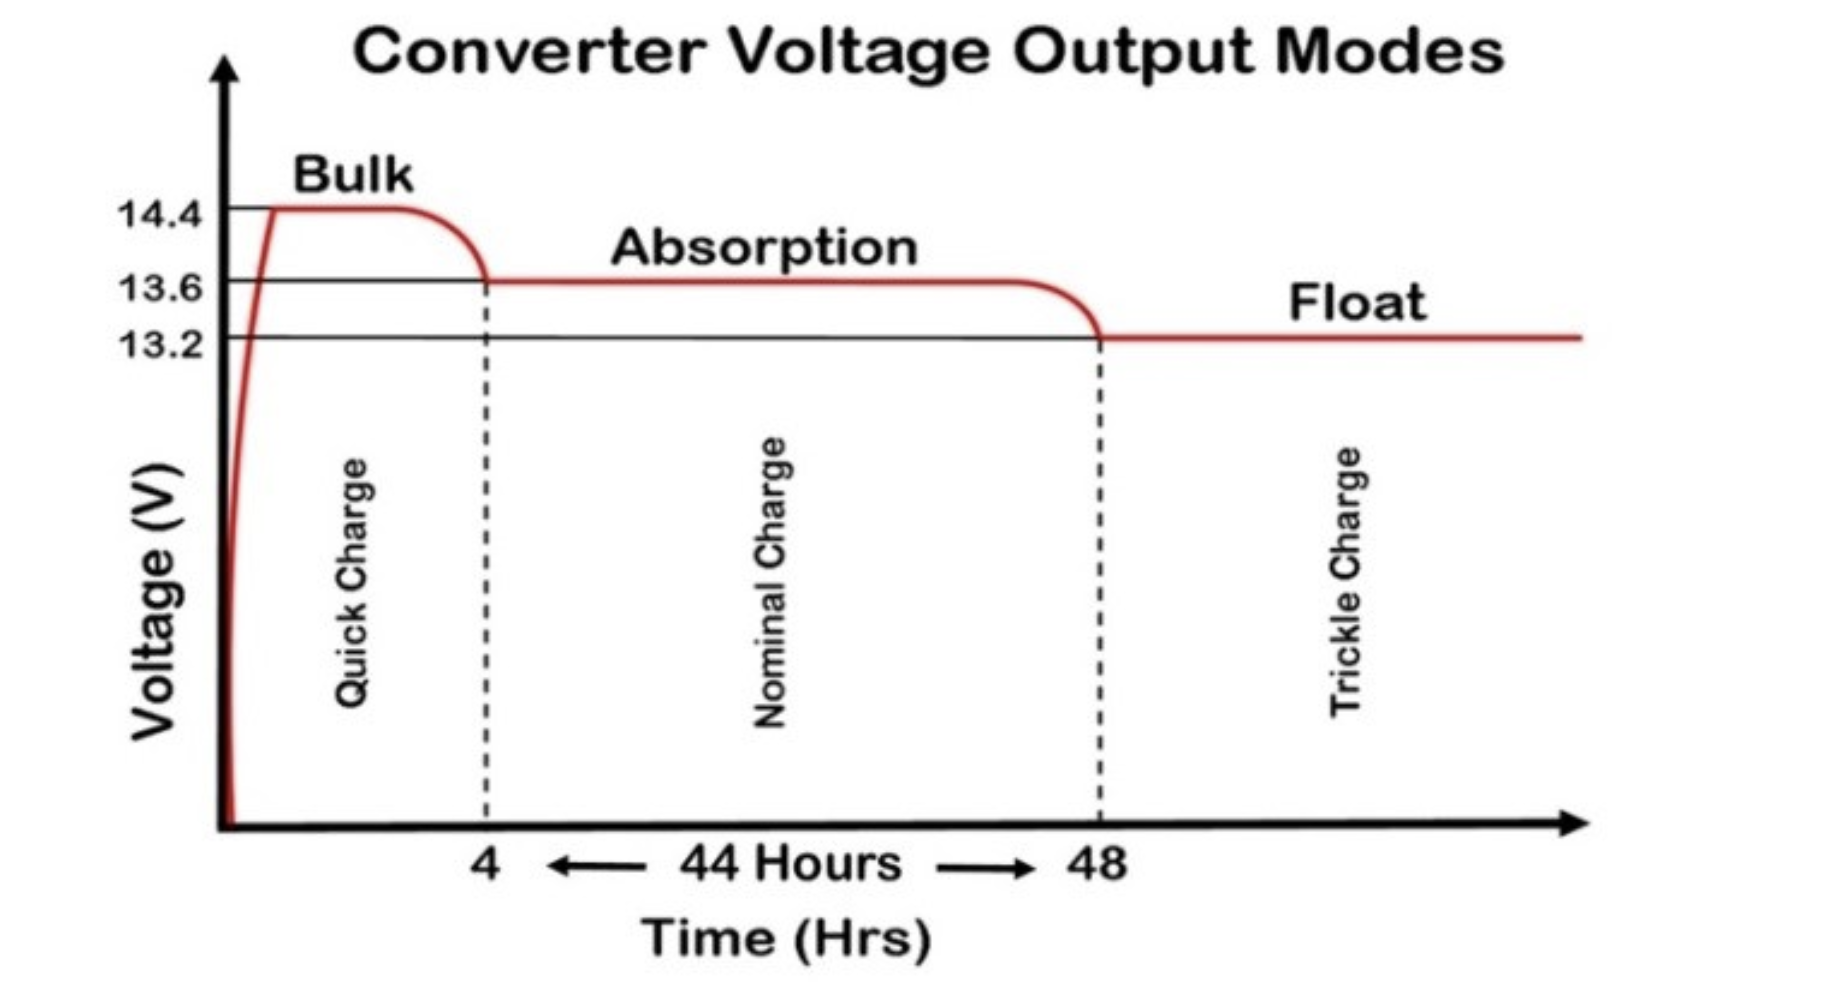 Airstream_Converter_Voltage_Output_Modes.png